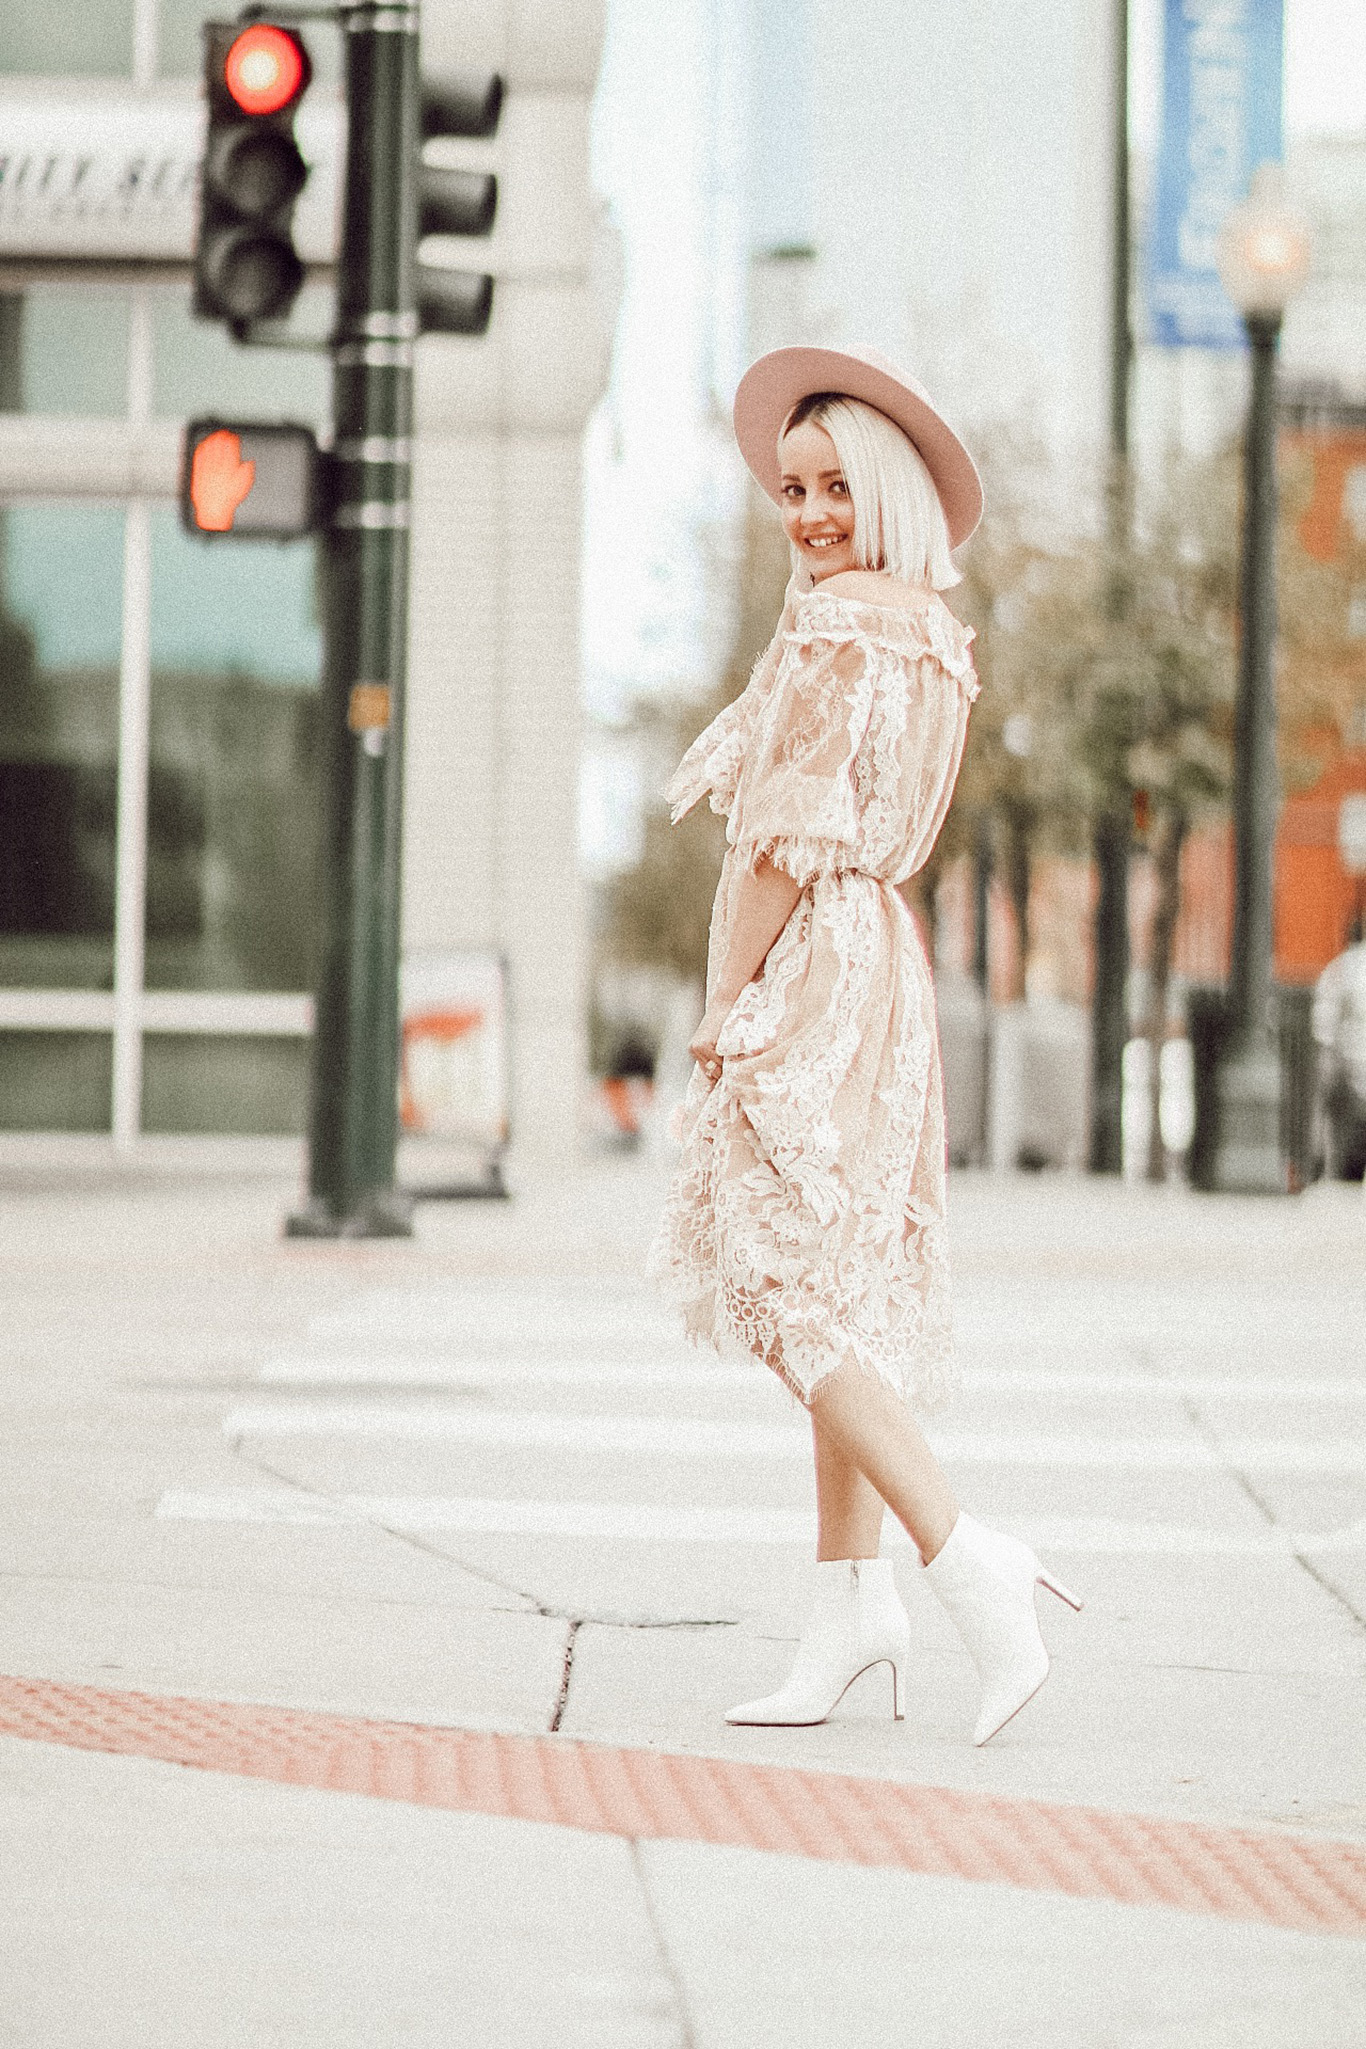 Alena Gidenko of modaprints.com shares her favorite lace dress for Fall and how she dressed it down